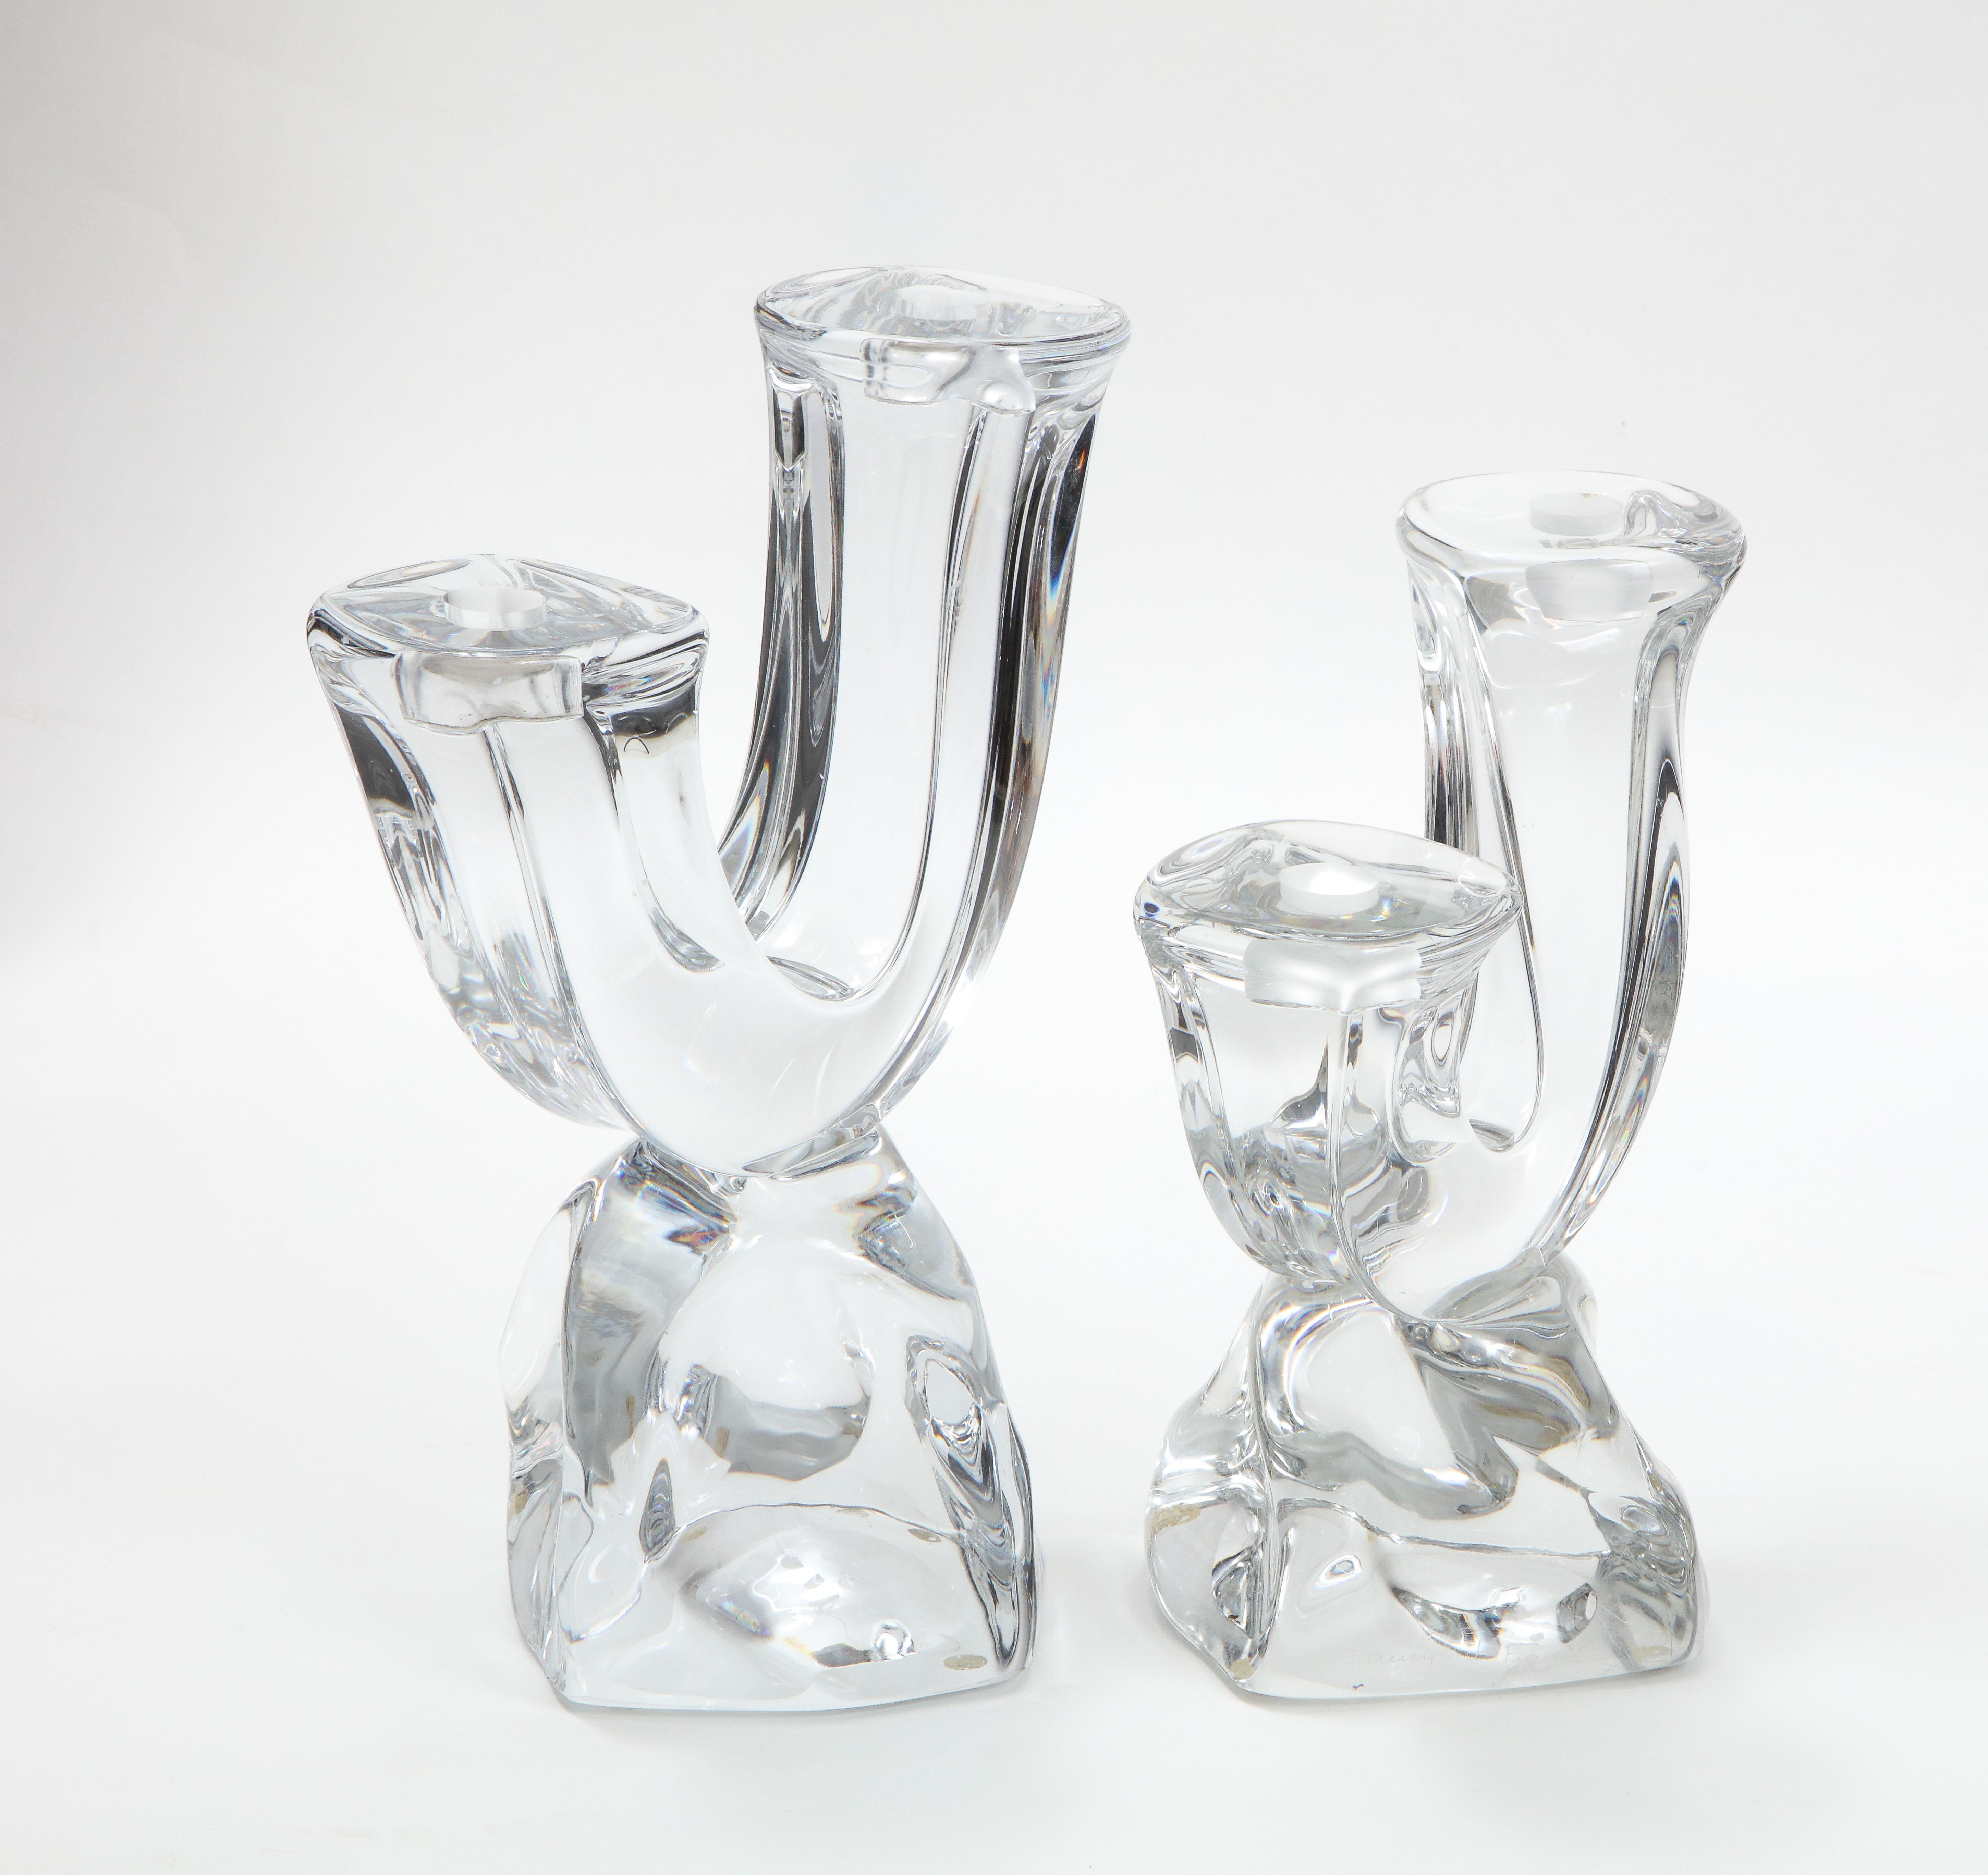 20th Century Daum France Two-Arm Crystal Candle Holders